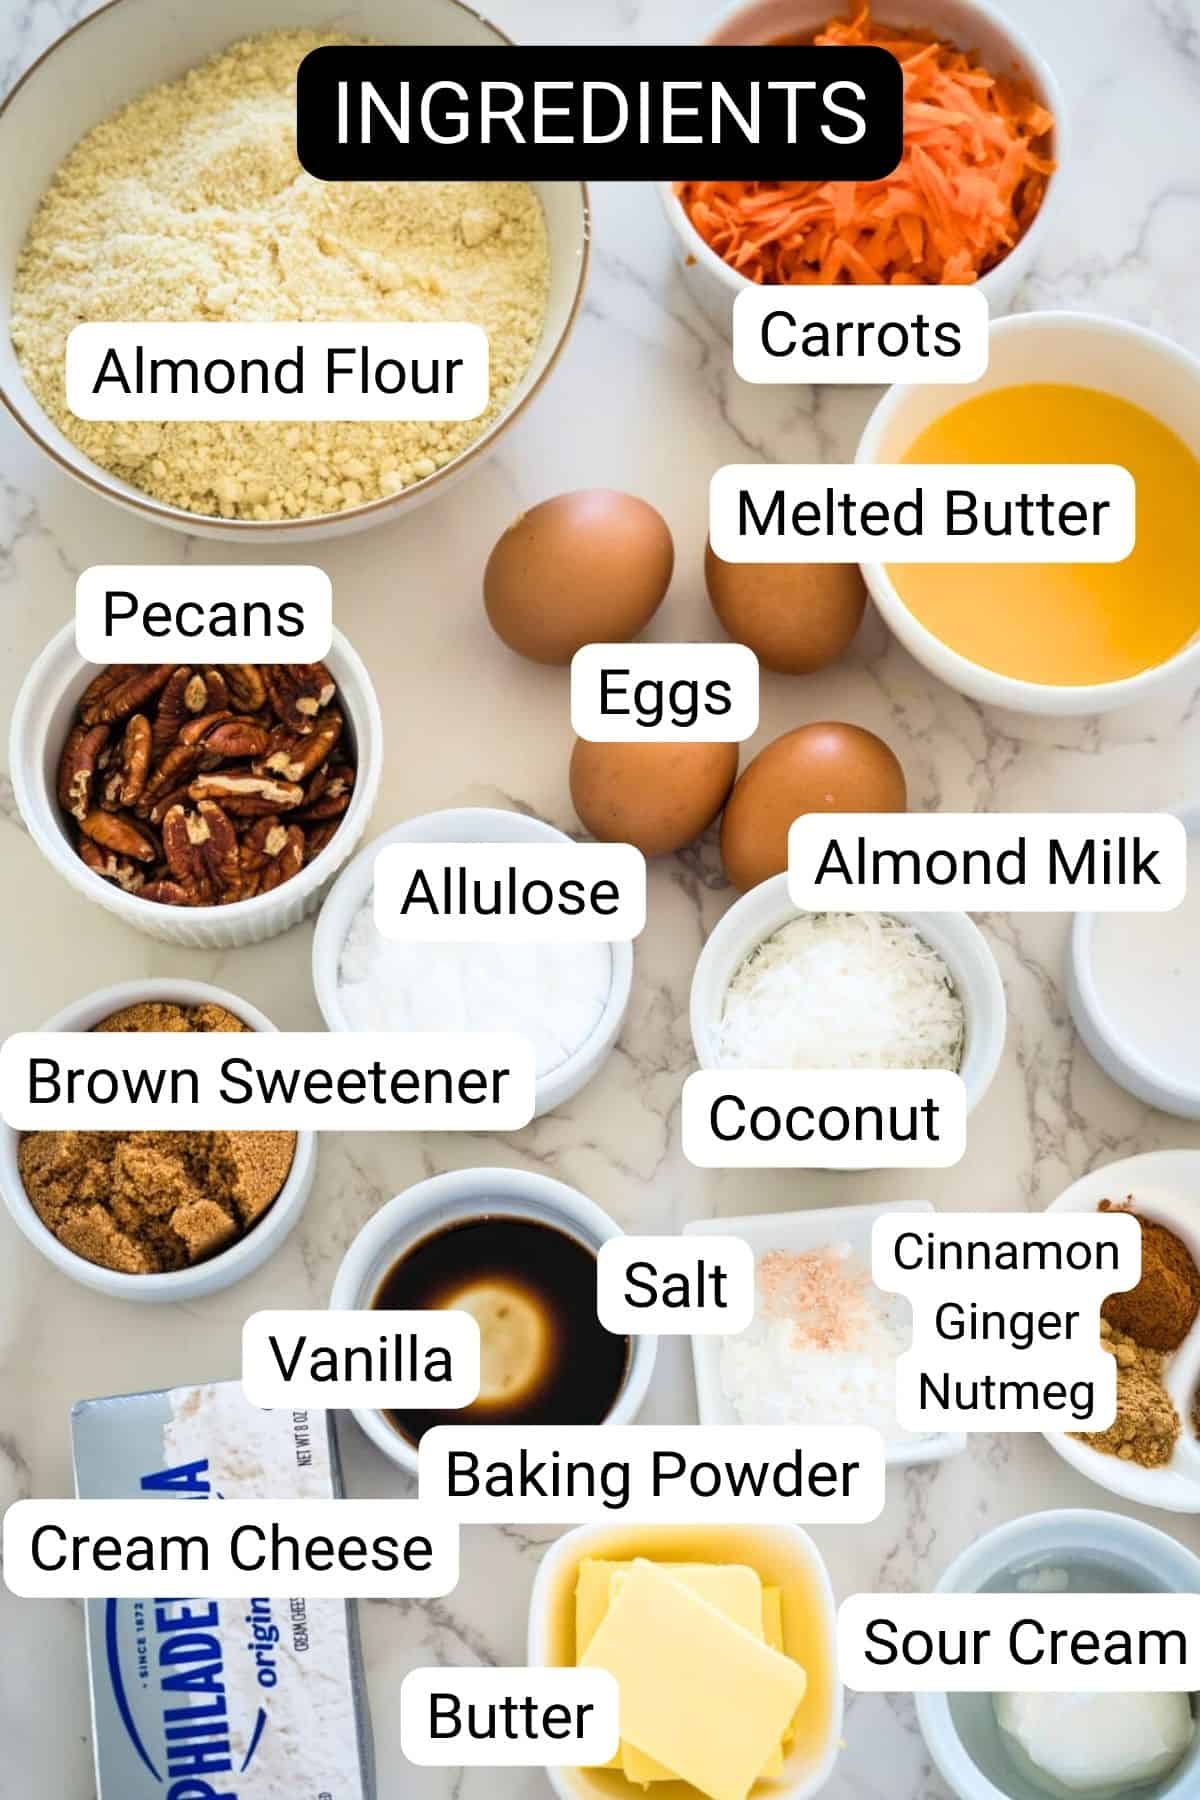 Various baking ingredients labeled and neatly arranged on a marble surface.